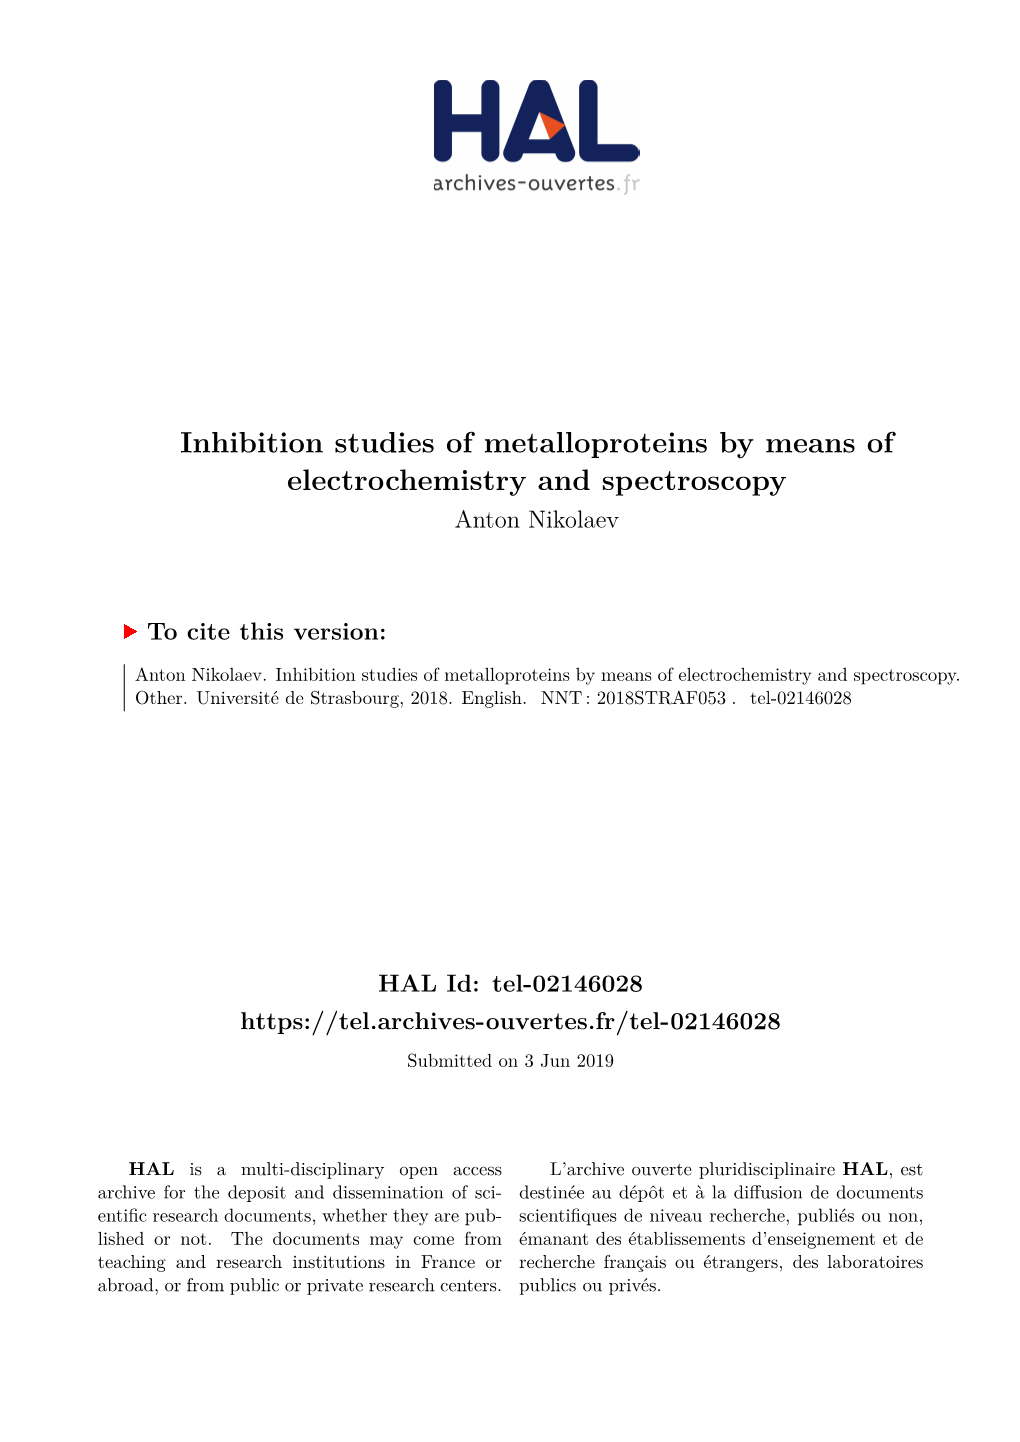 Inhibition Studies of Metalloproteins by Means of Electrochemistry and Spectroscopy Anton Nikolaev